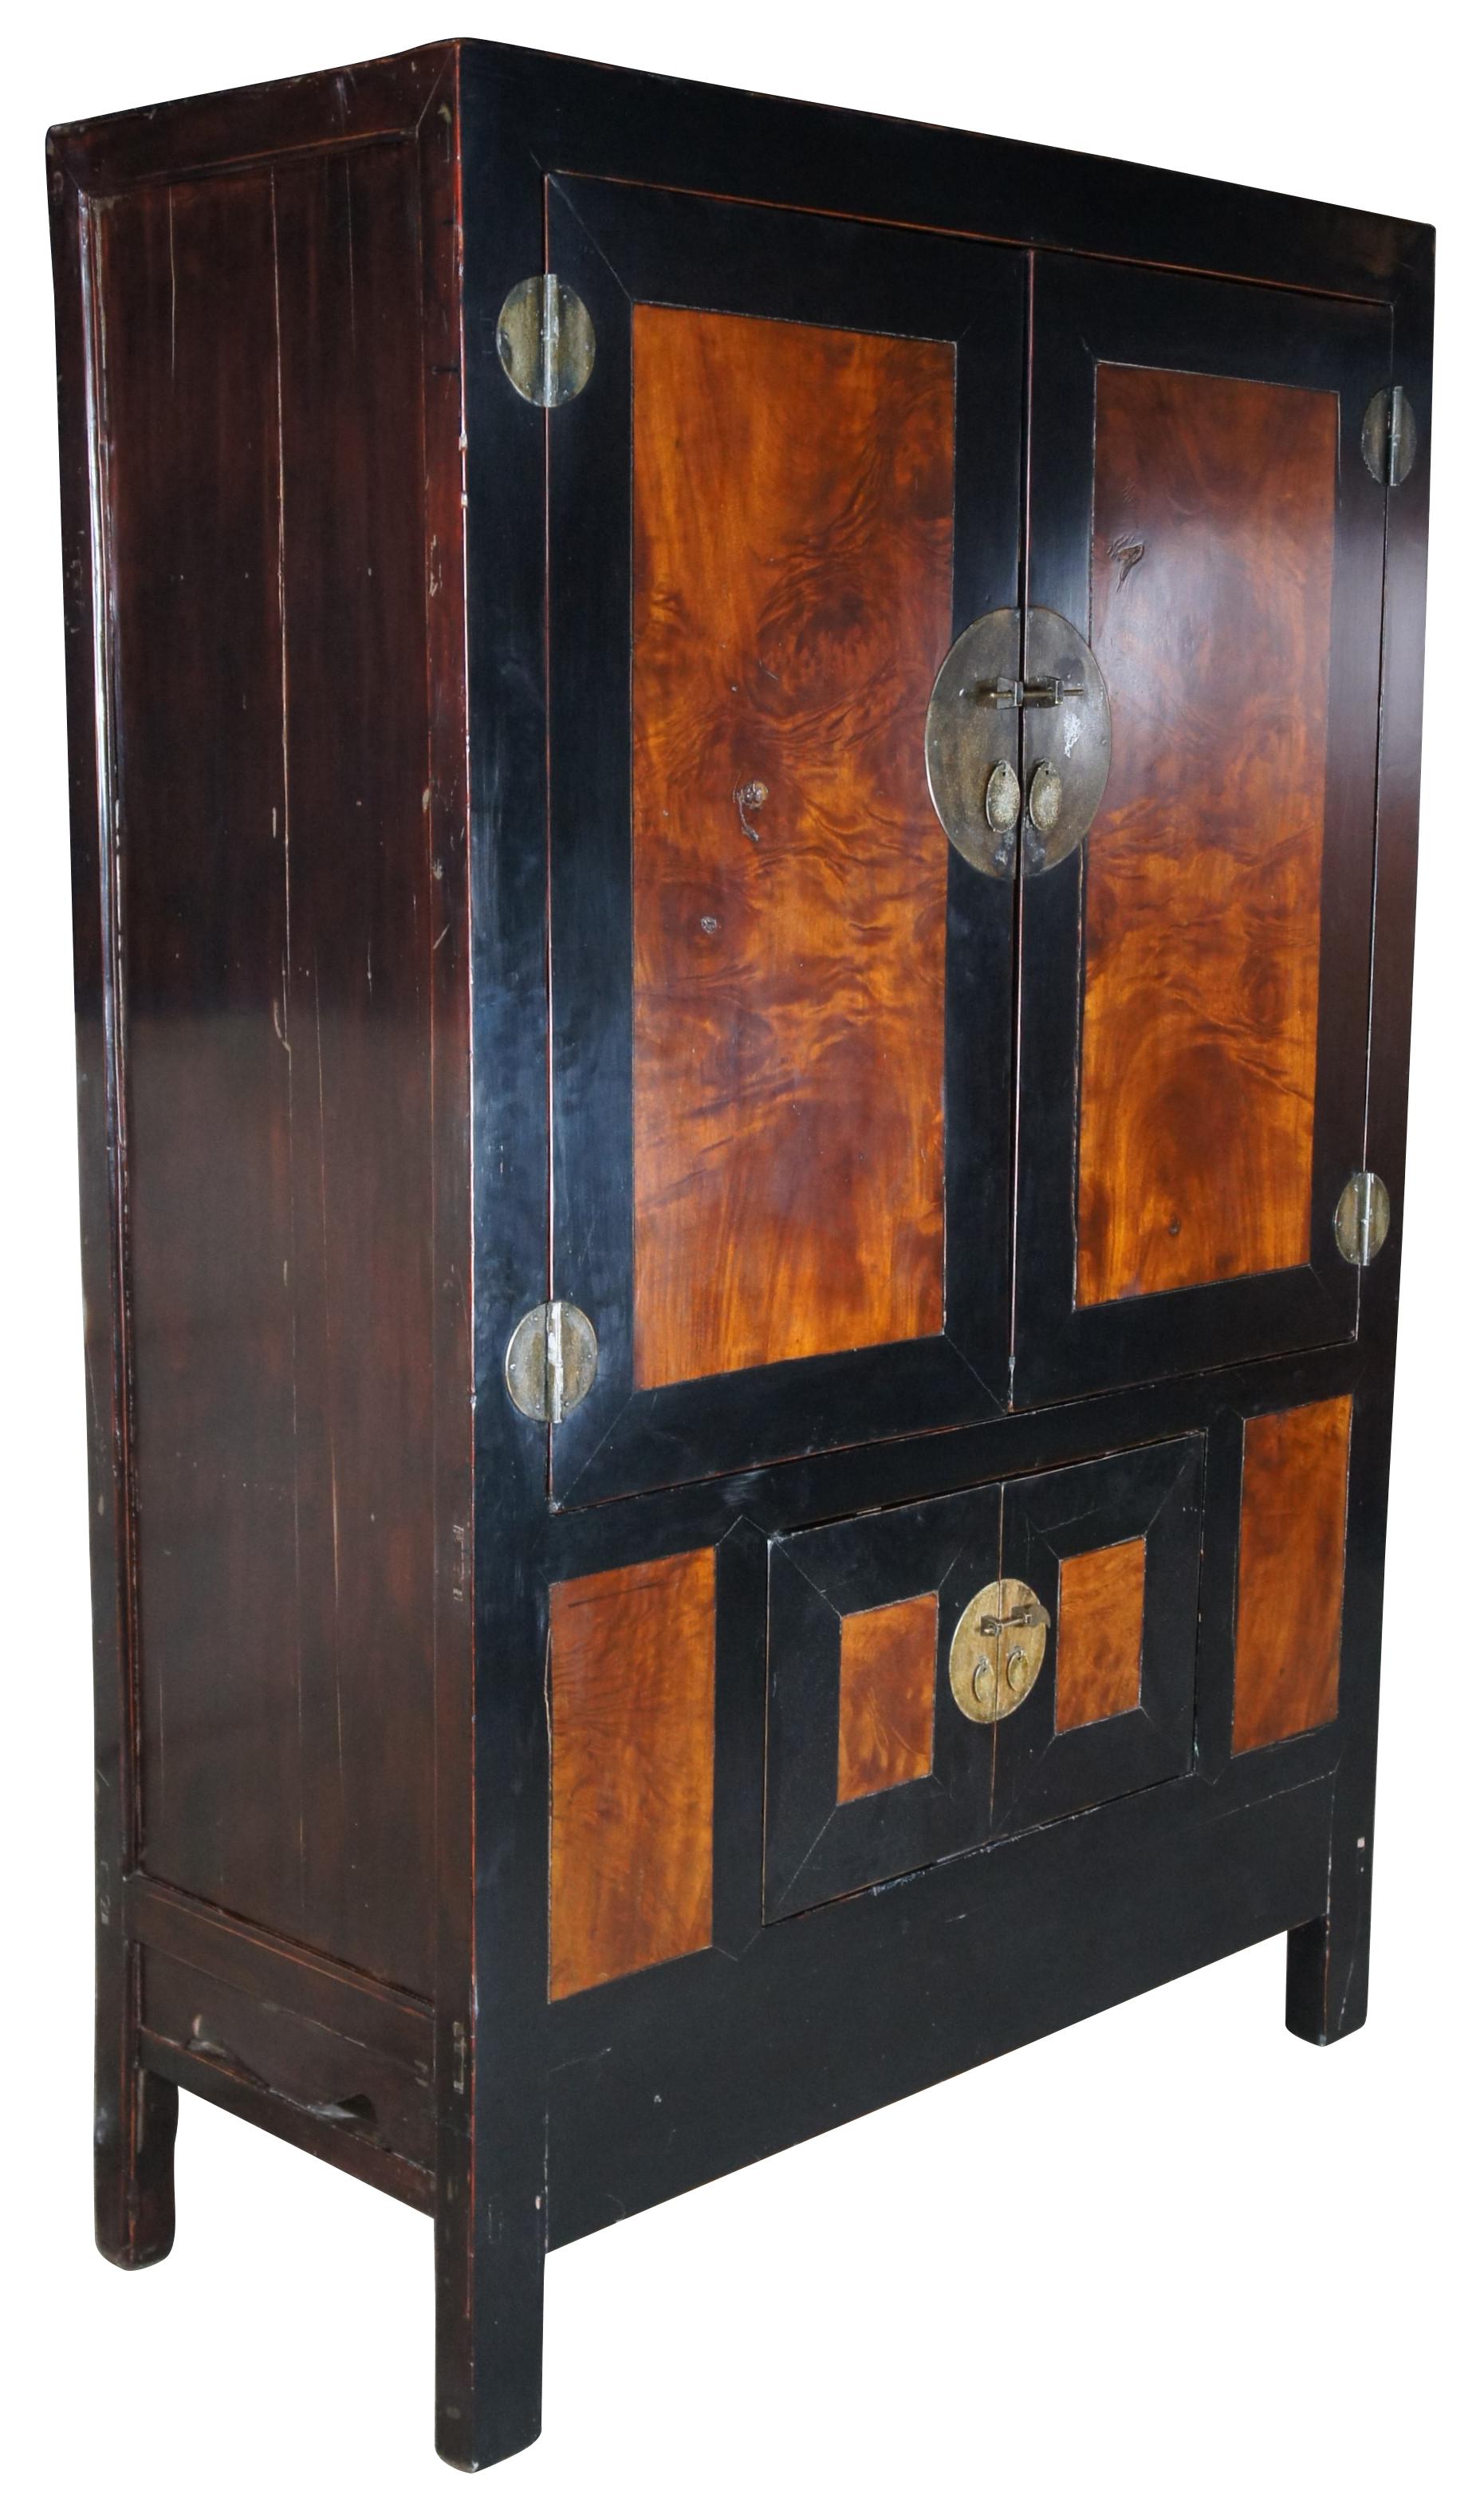 An impressive 20th century Ming Dynasty inspired lacquered elm wedding storage cabinet or wardrobe. Features a large frame finished in black along the front with inset Carpathian elm burl wood panels. The double doors open to two removable shelves